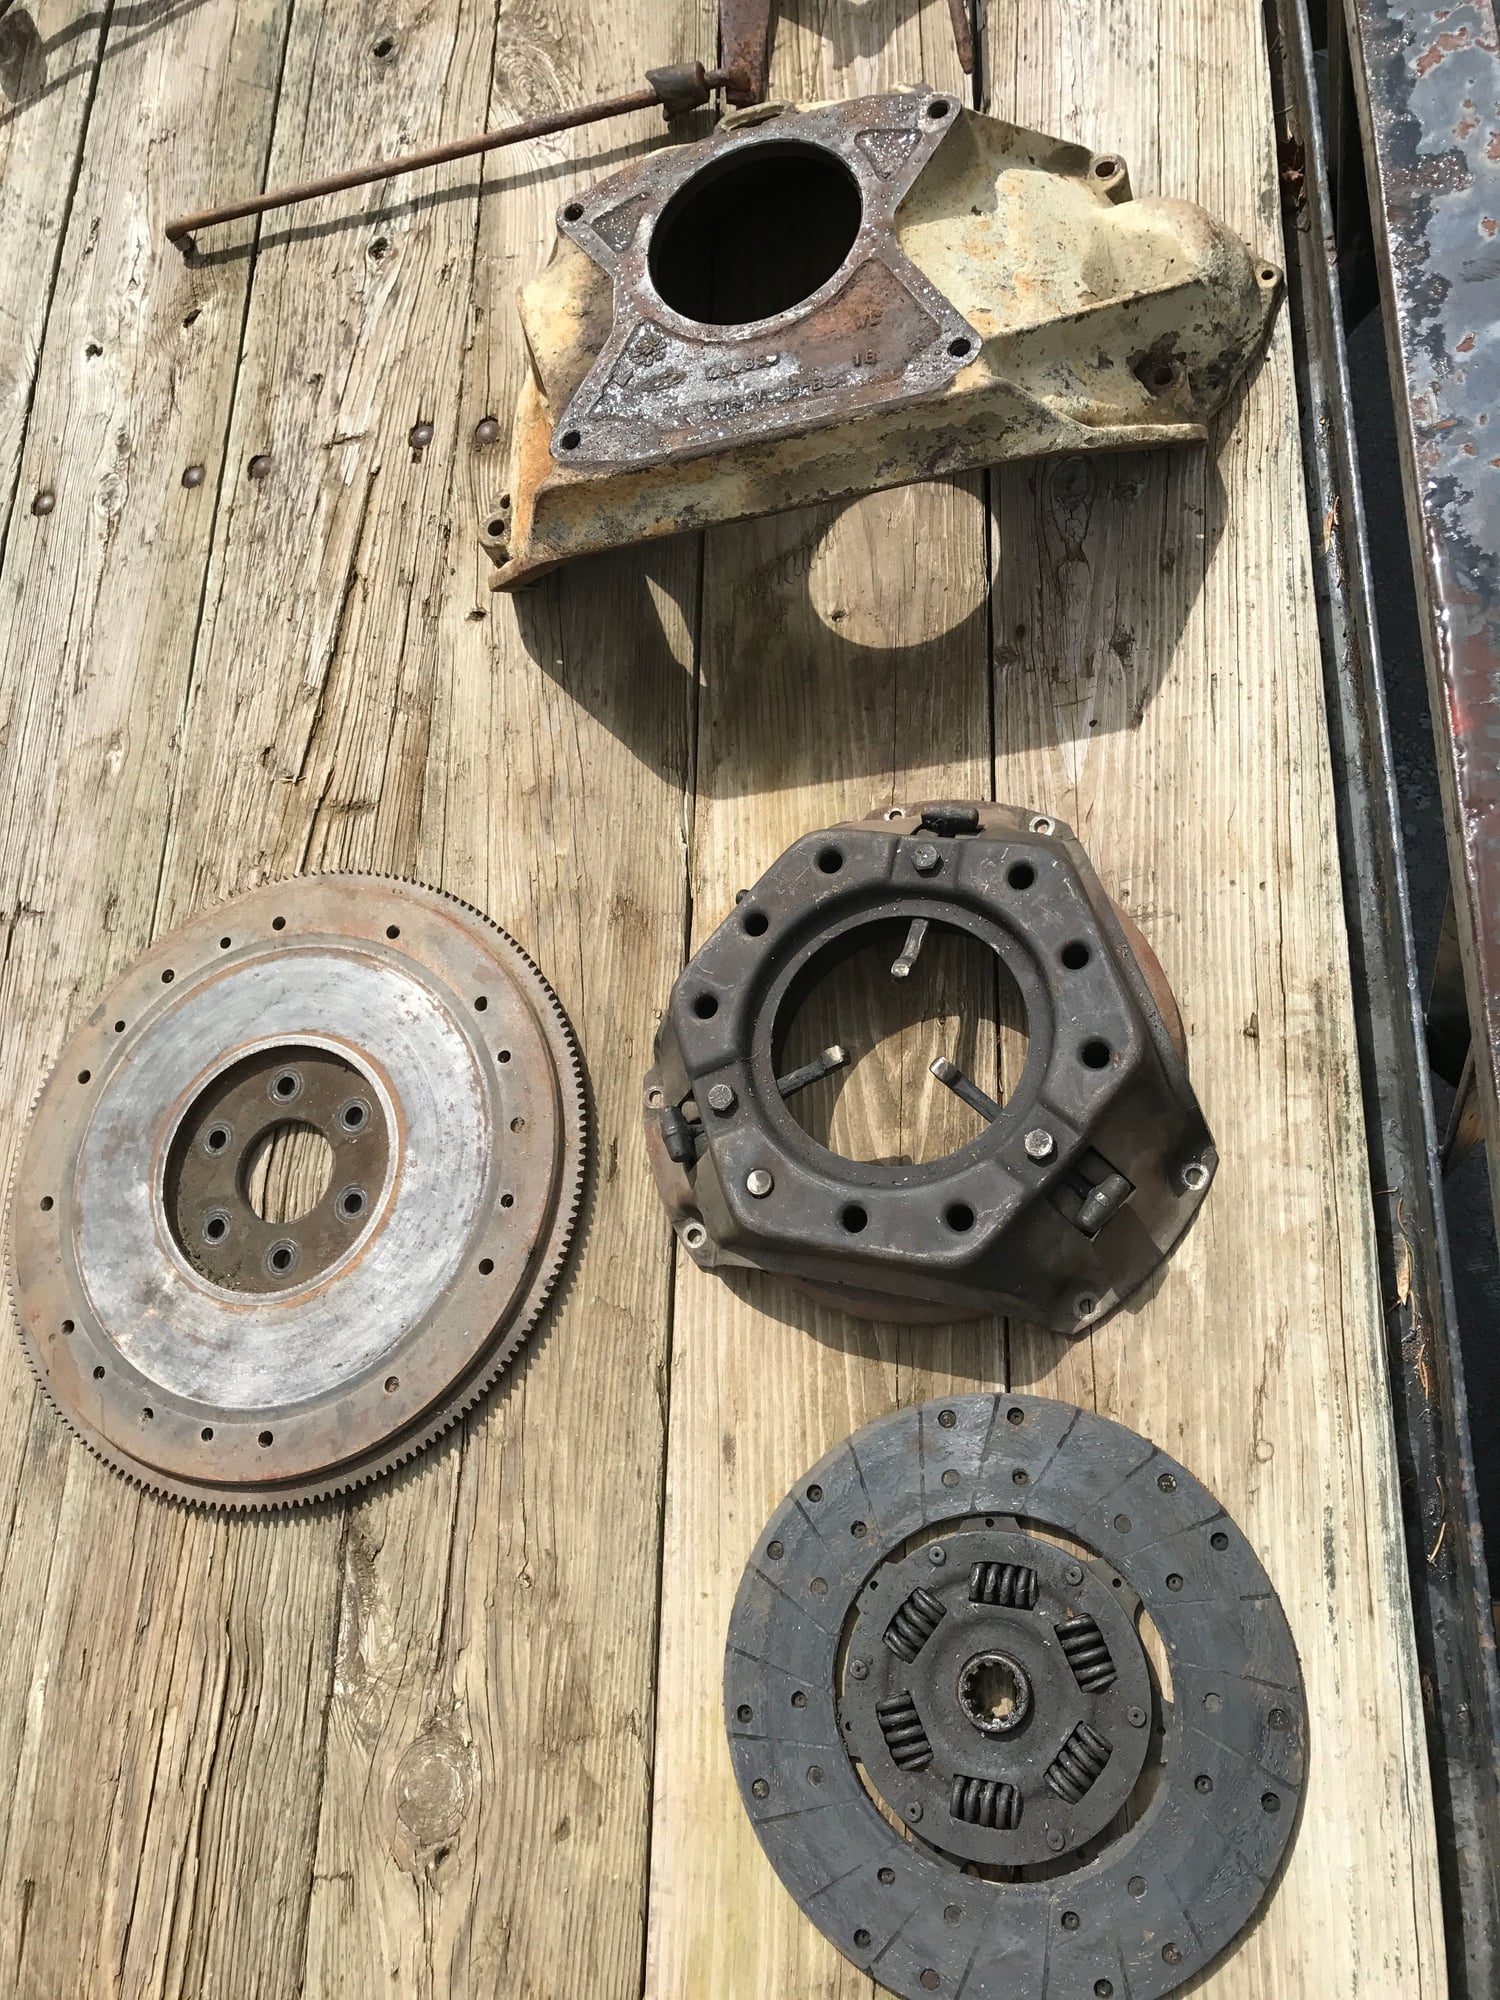 Miscellaneous - 73-79 Ford Truck Parts - Body Parts, Interior, Drivetrain, Engines, Transmissions, Accessories, Etc. - Used - 1973 to 1979 Ford All Models - Binghamton, NY 13904, United States